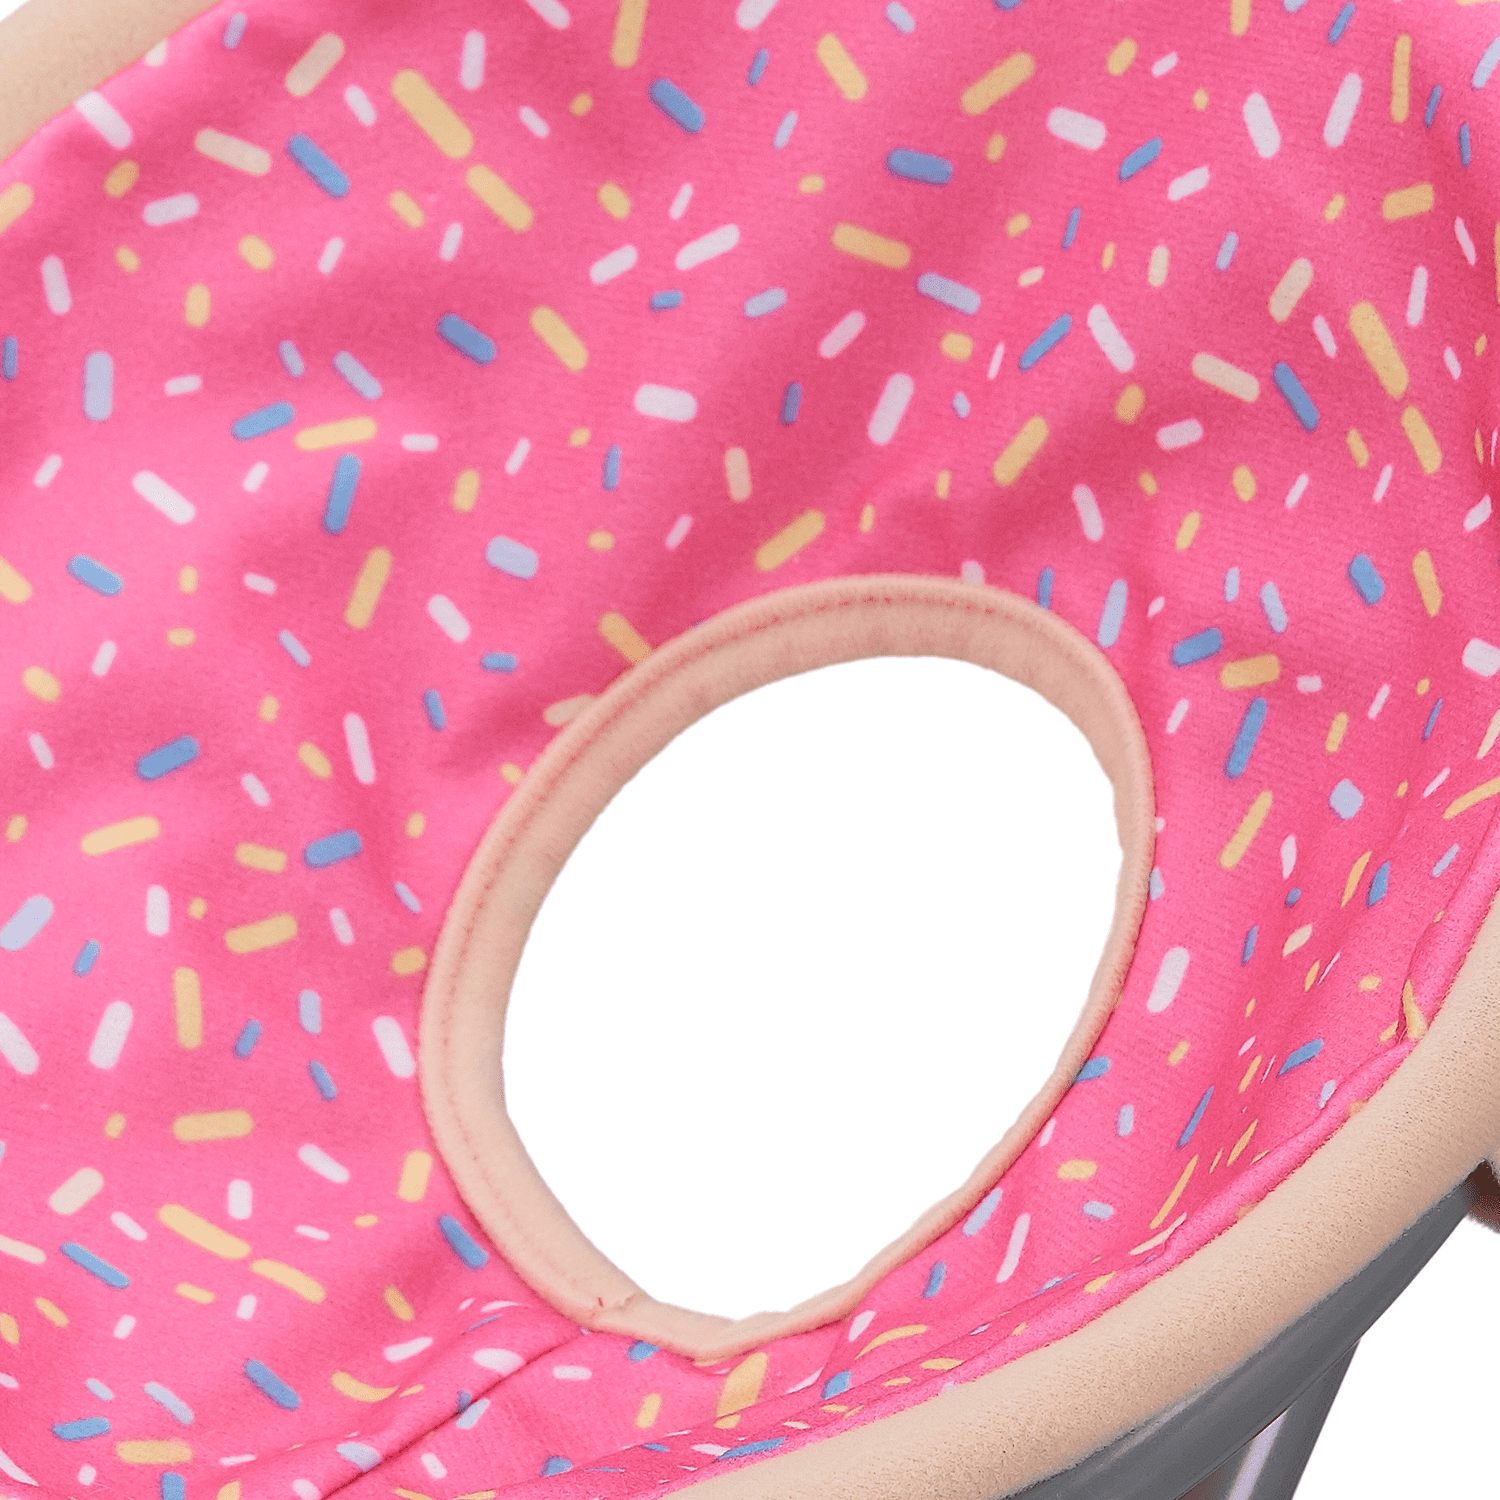 My Life As A Donut Saucer Chair for 18 Dolls (Doll Not Included)